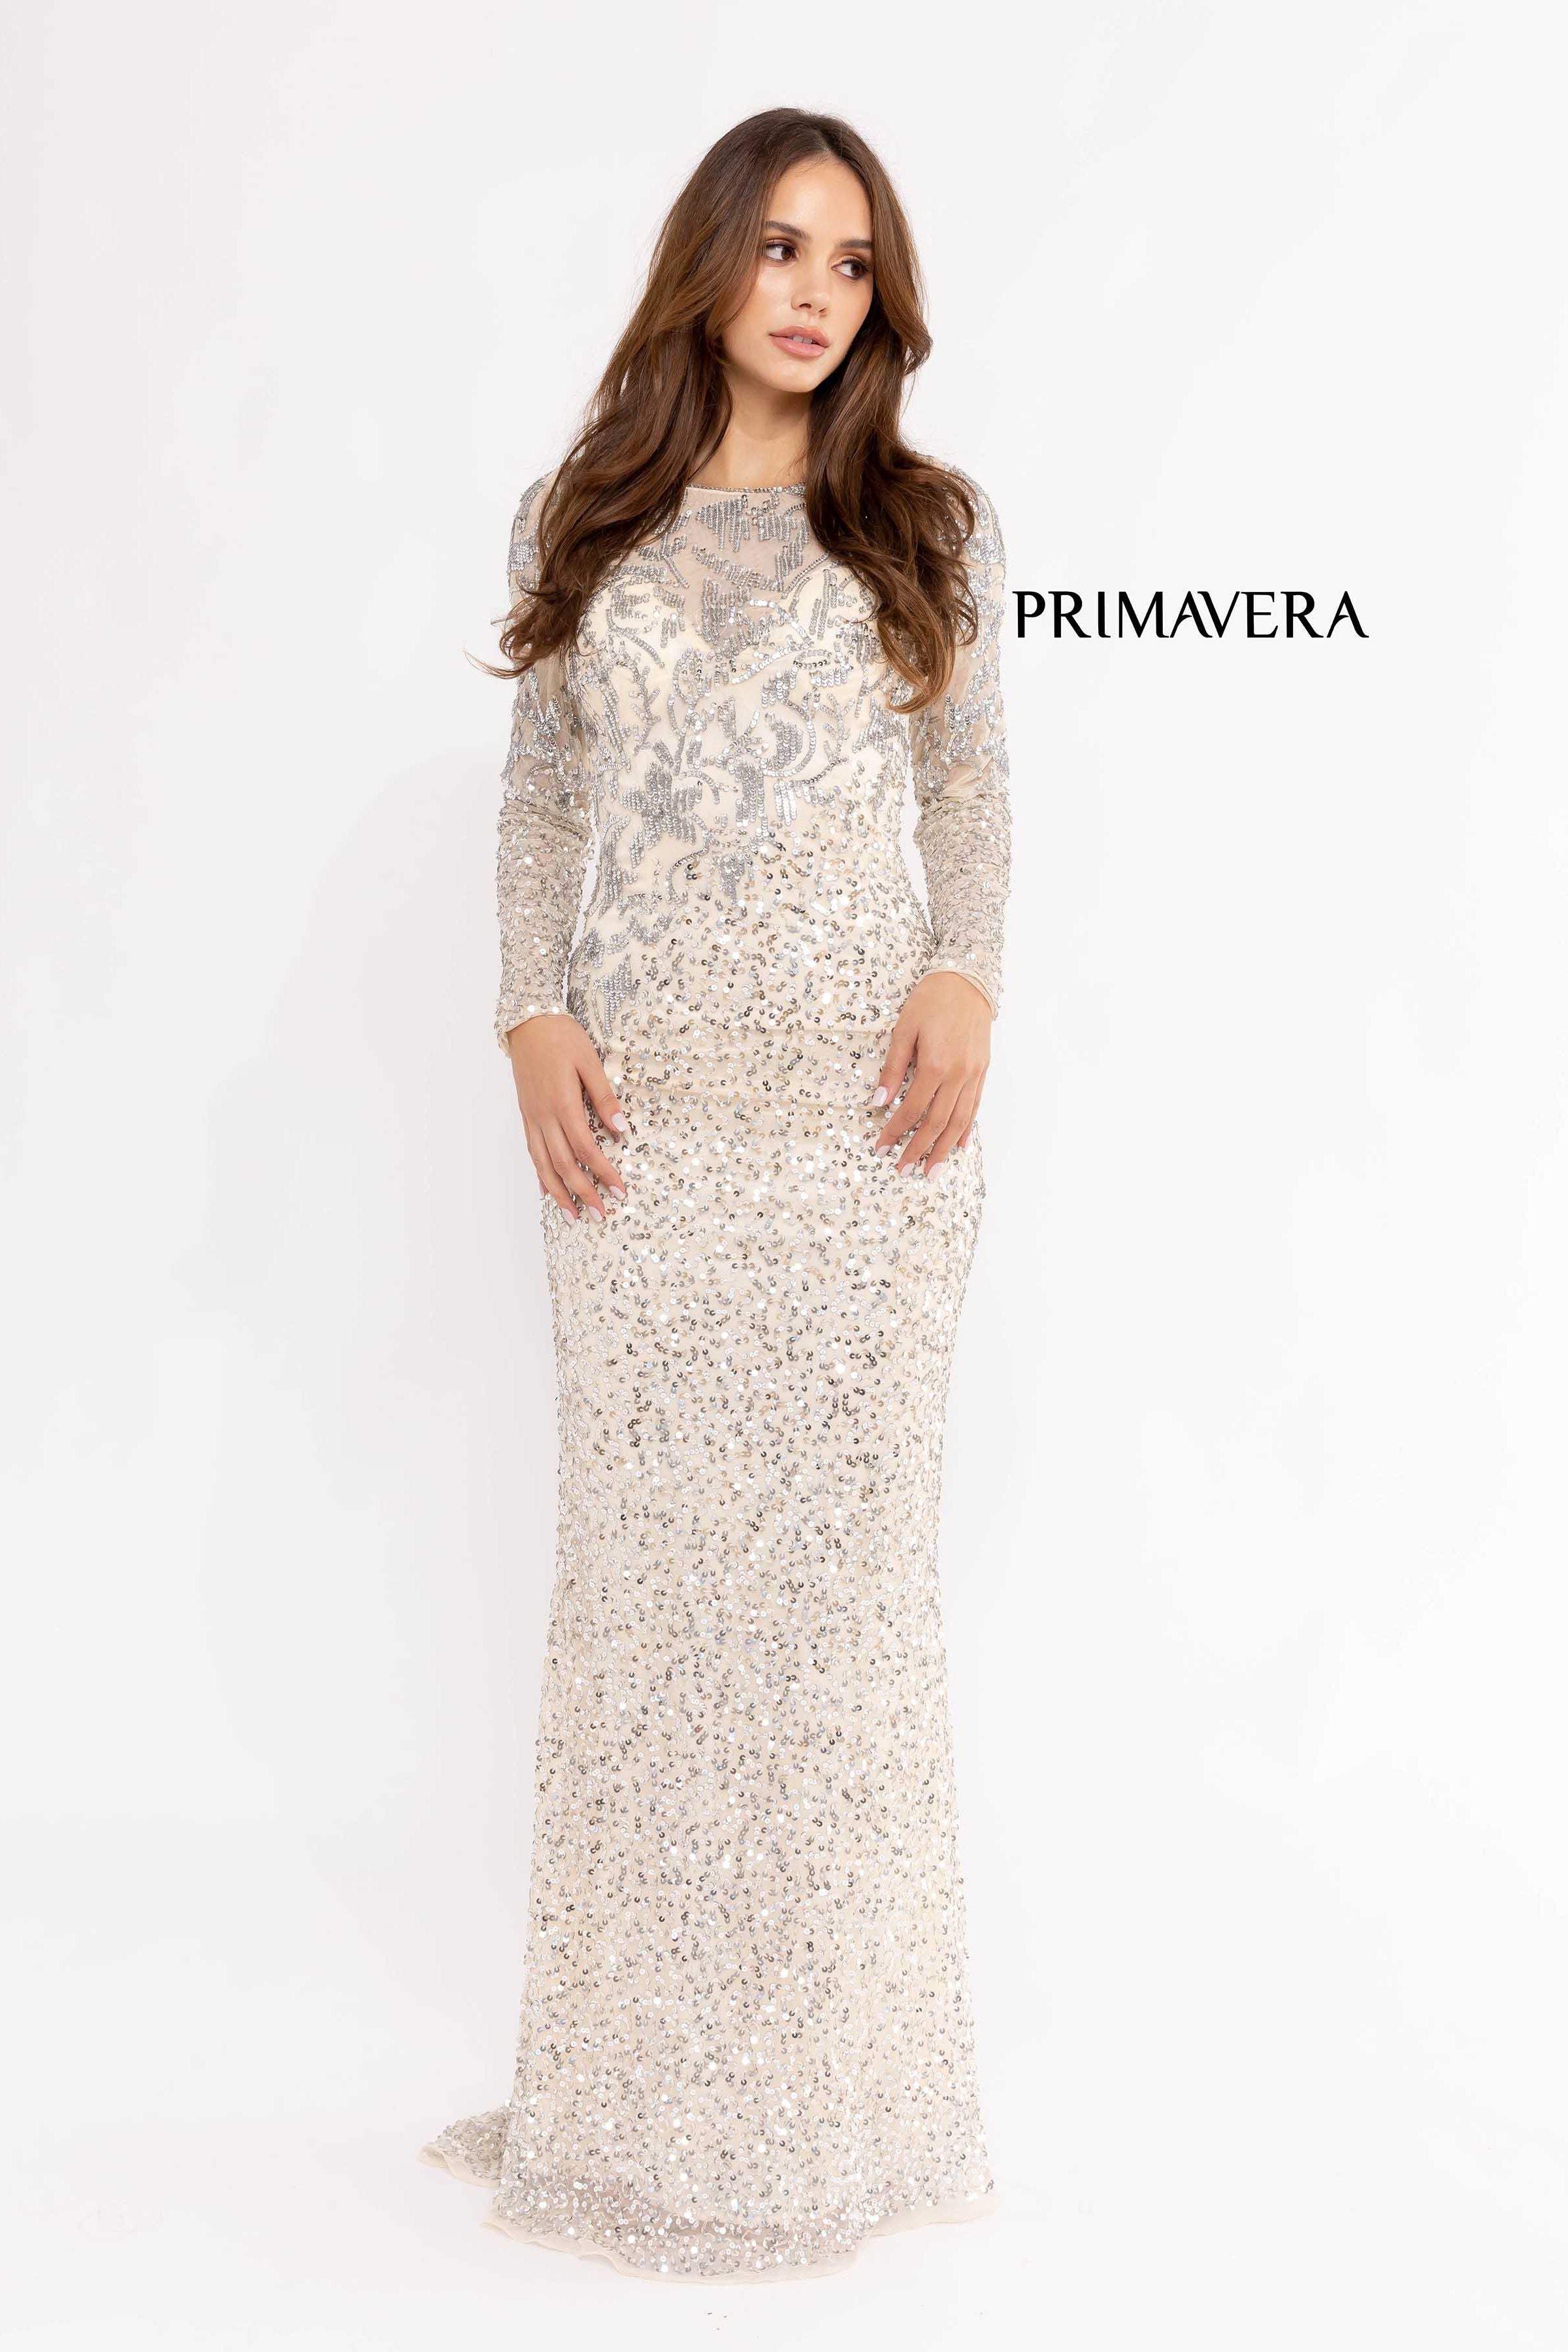 Long Sleeve Evening Gown By Primavera Couture -13105